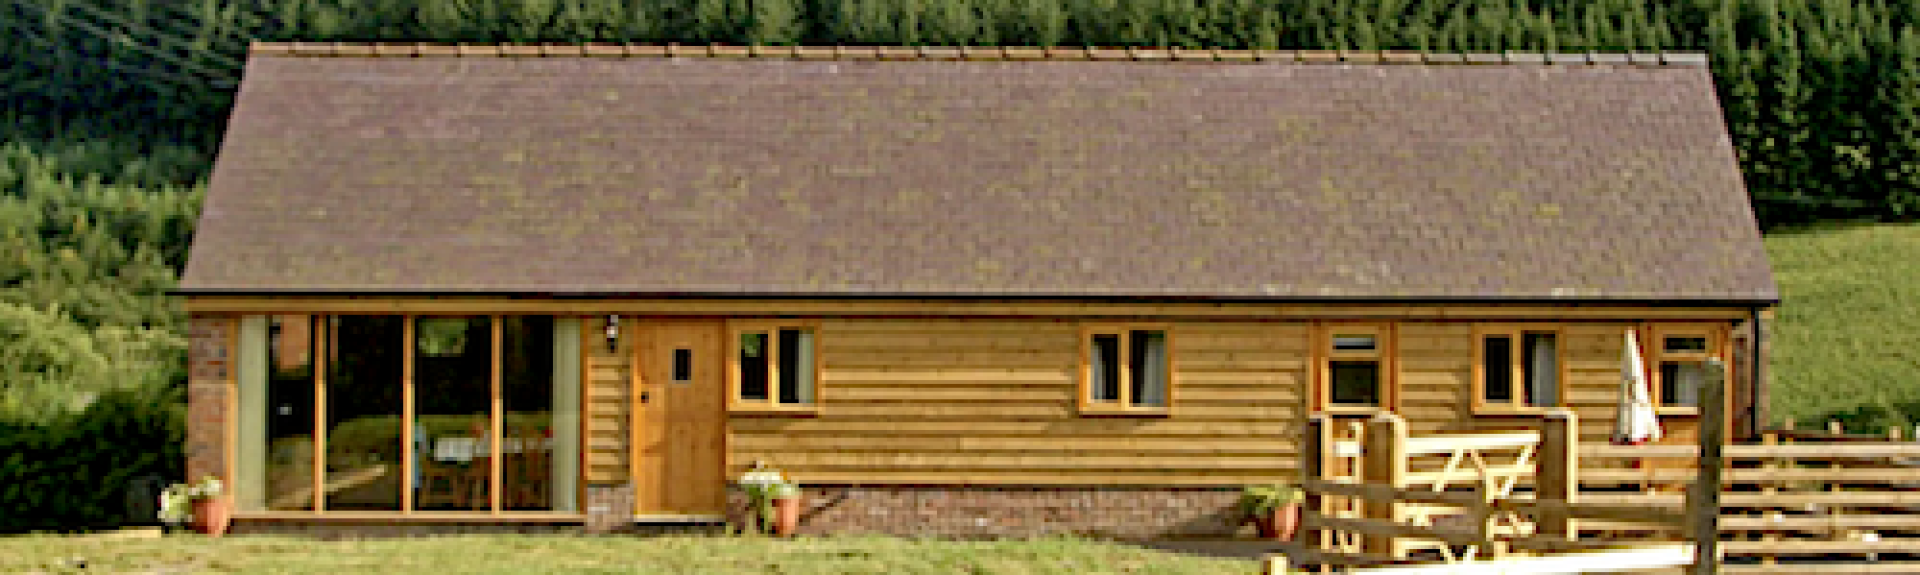 Exterior of a wooden eco-lodge with woods to the rear and open fields in the foreground.